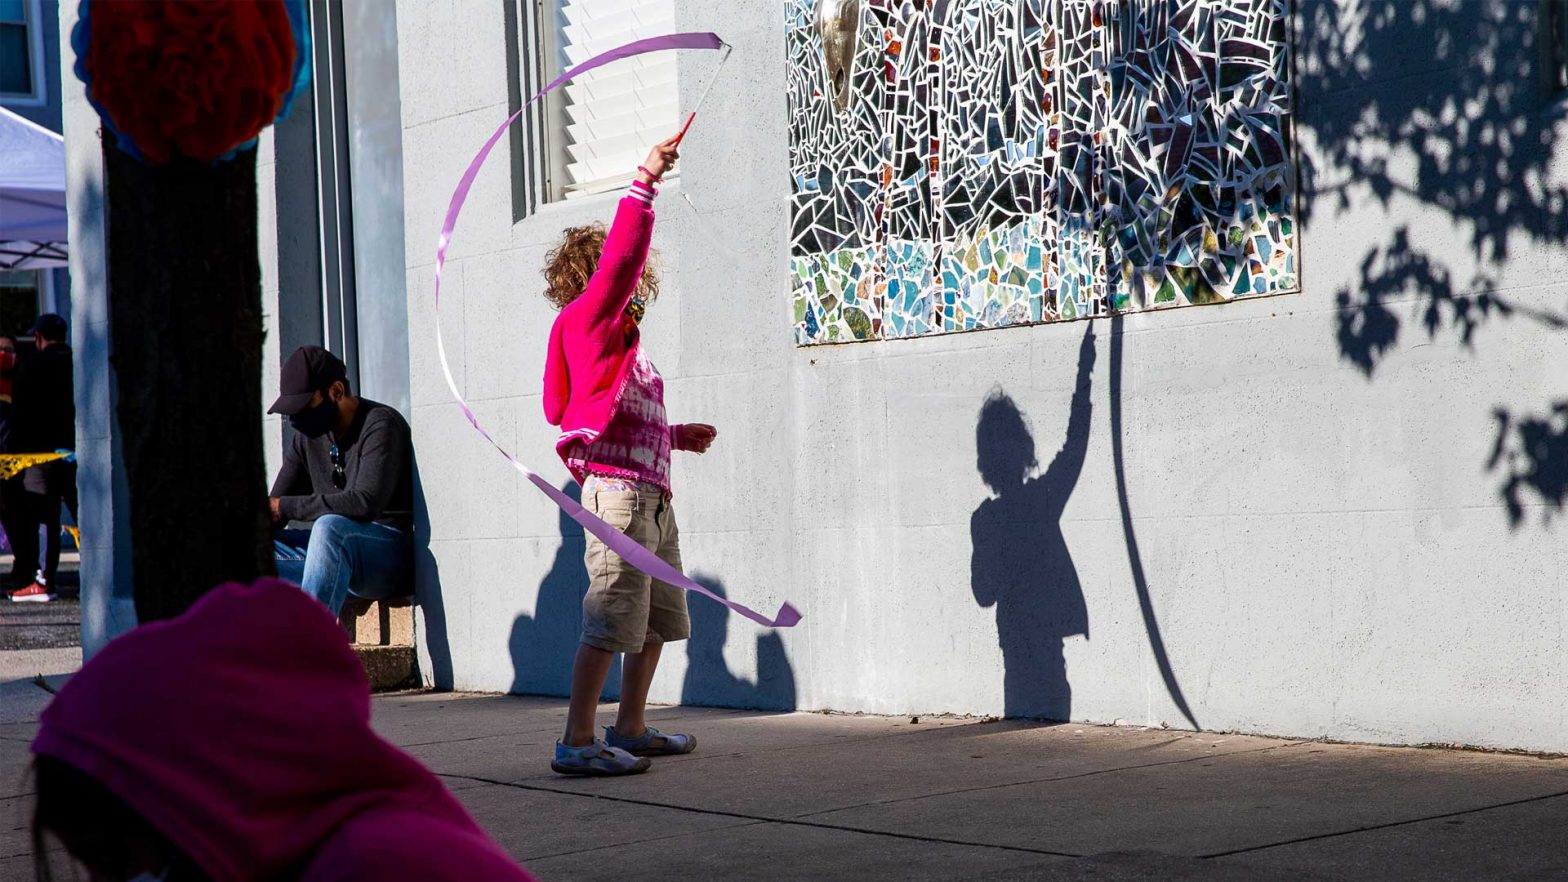 Child twirling a streamer at a street fair